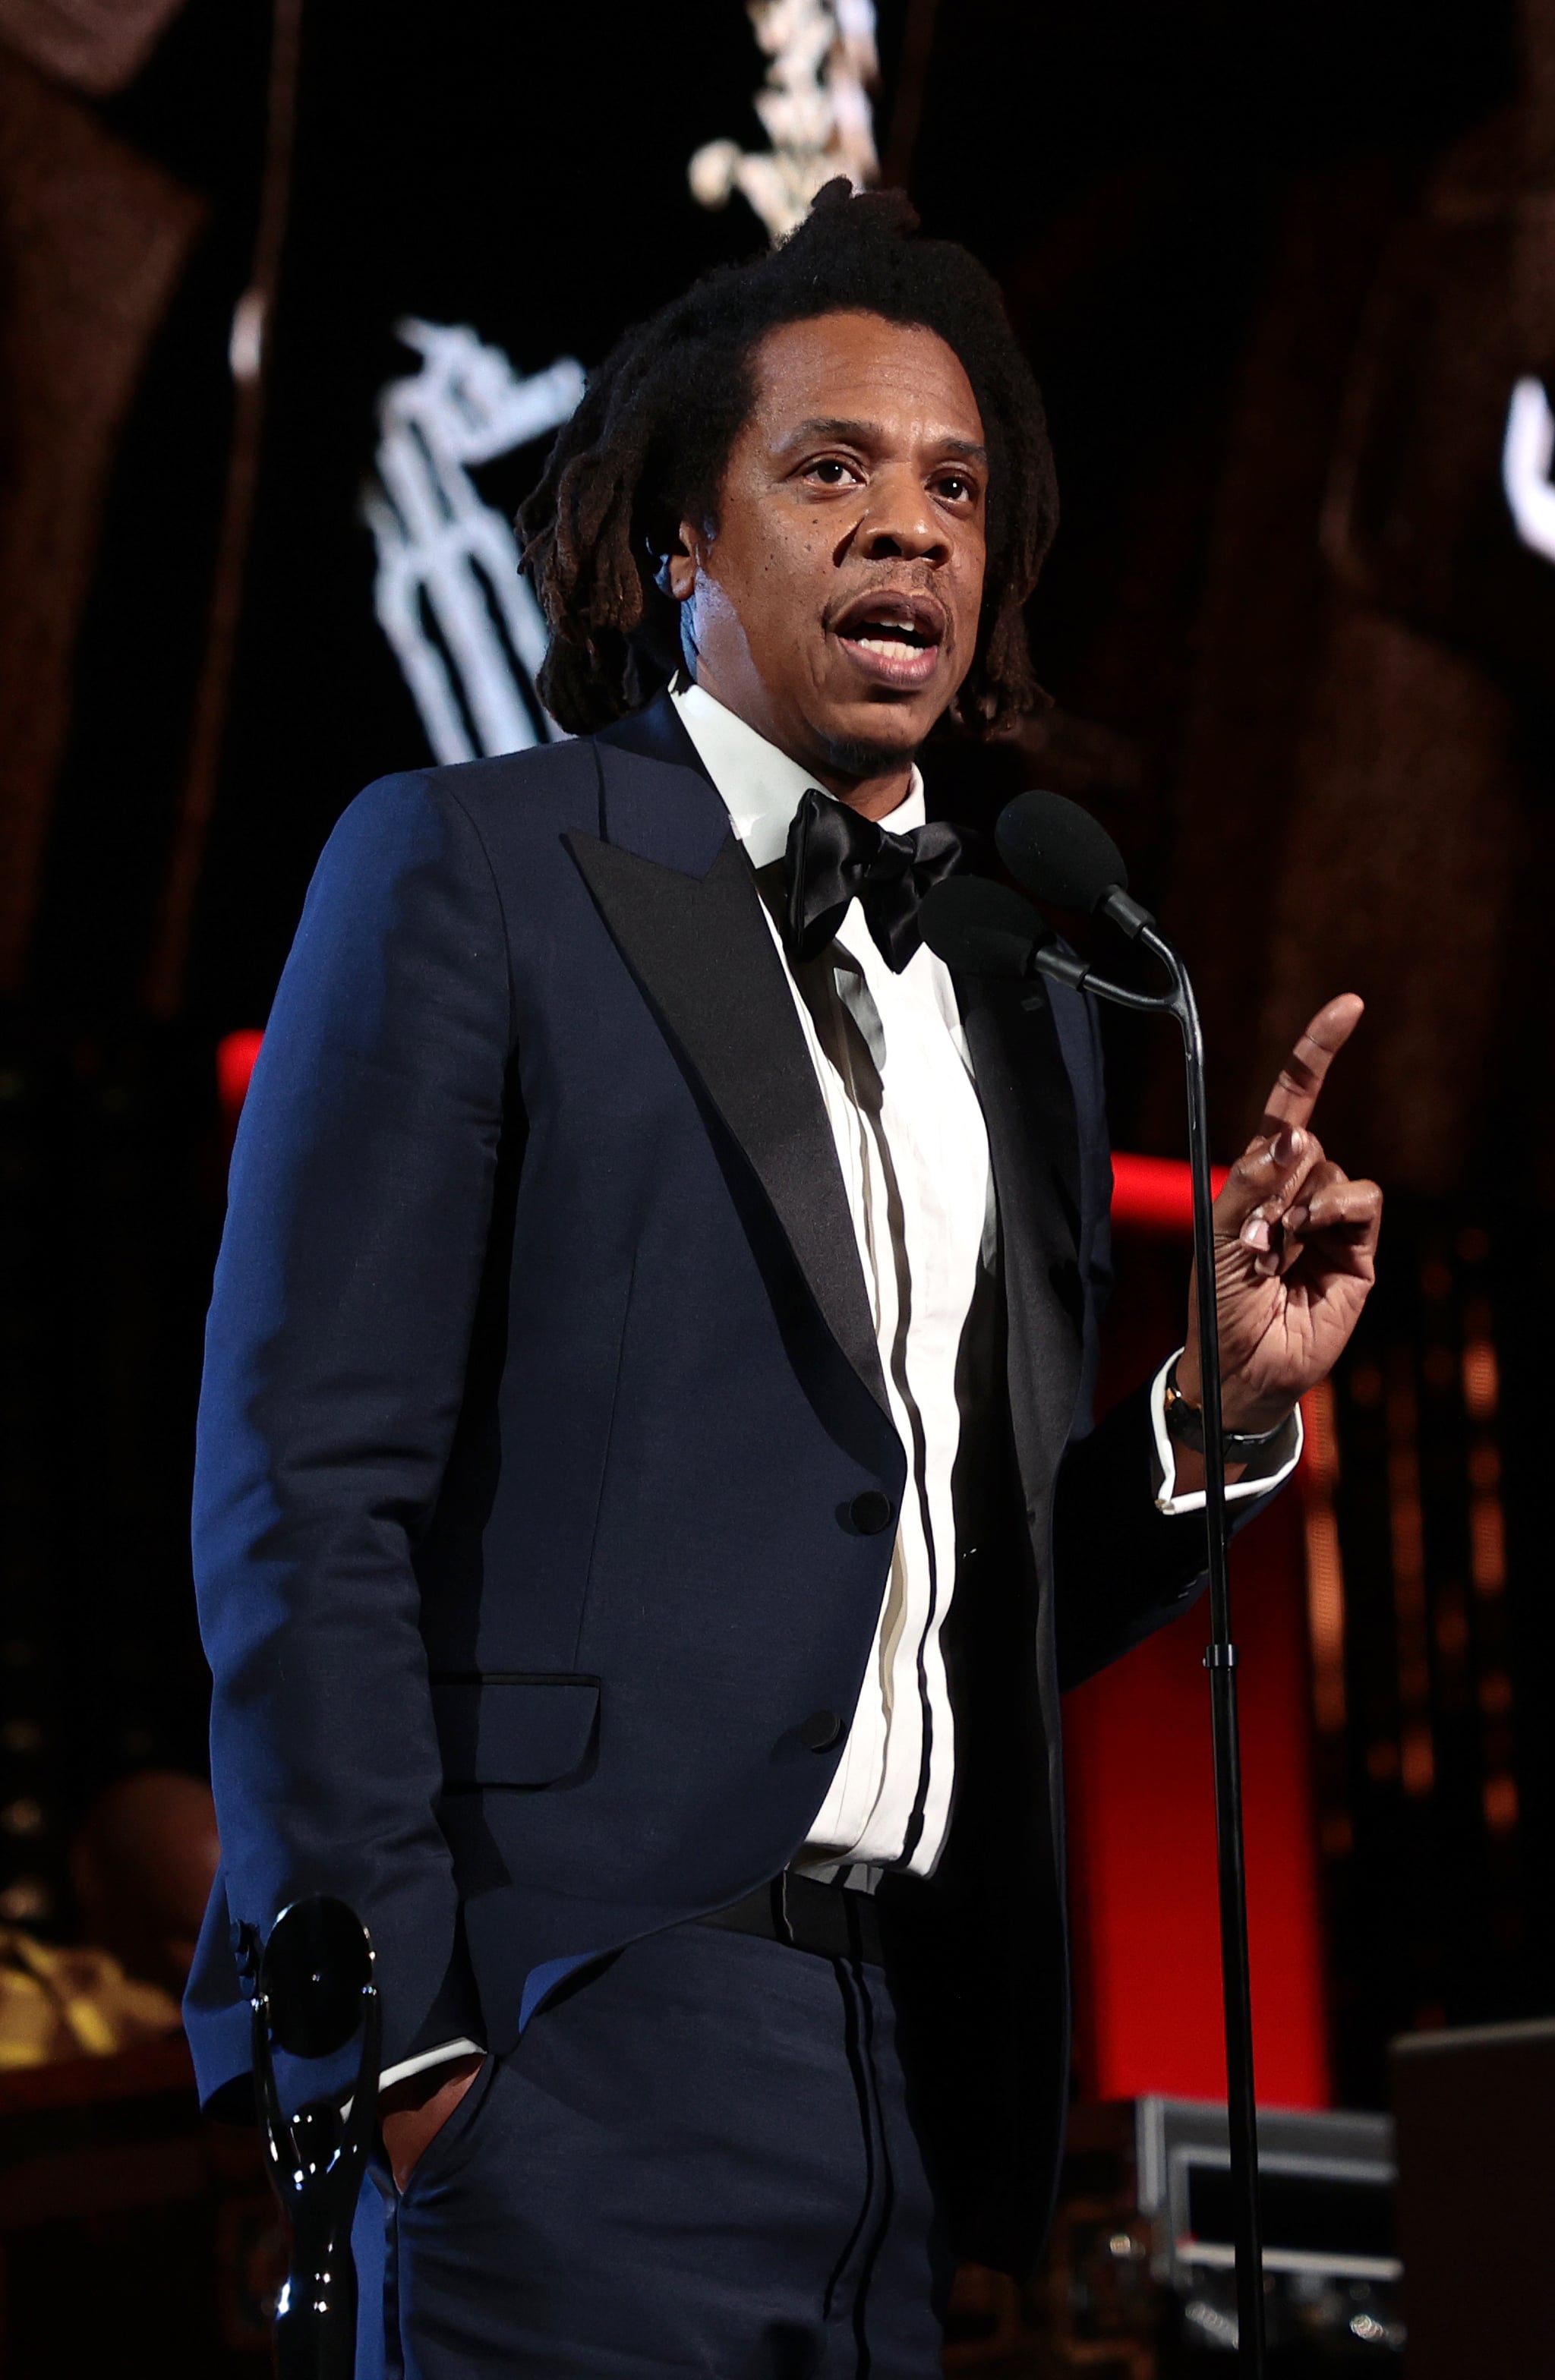 CLEVELAND, OHIO - OCTOBER 30:  Jay Z is inducted onstage during the 36th Annual Rock & Roll Hall Of Fame Induction Ceremony at Rocket Mortgage Fieldhouse on October 30, 2021 in Cleveland, Ohio.  (Photo by Dimitrios Kambouris/Getty Images for The Rock and Roll Hall of Fame )